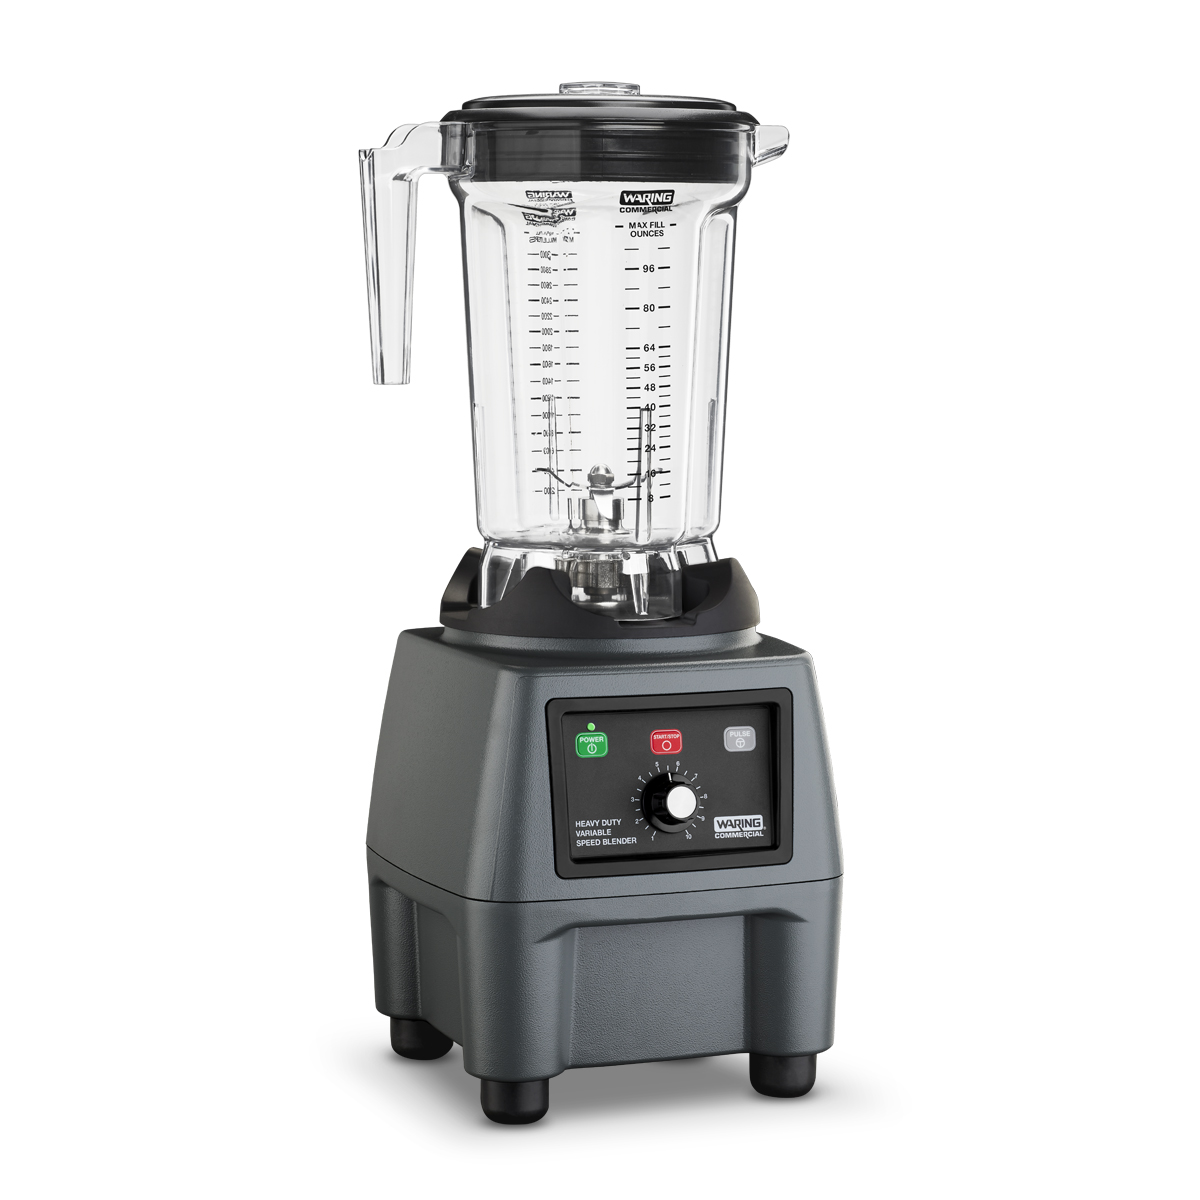 https://www.waringlab.com/assets/images/database/products/cb15vp-waring-lab-variable-speed-blender-with-plastic-container-main.png